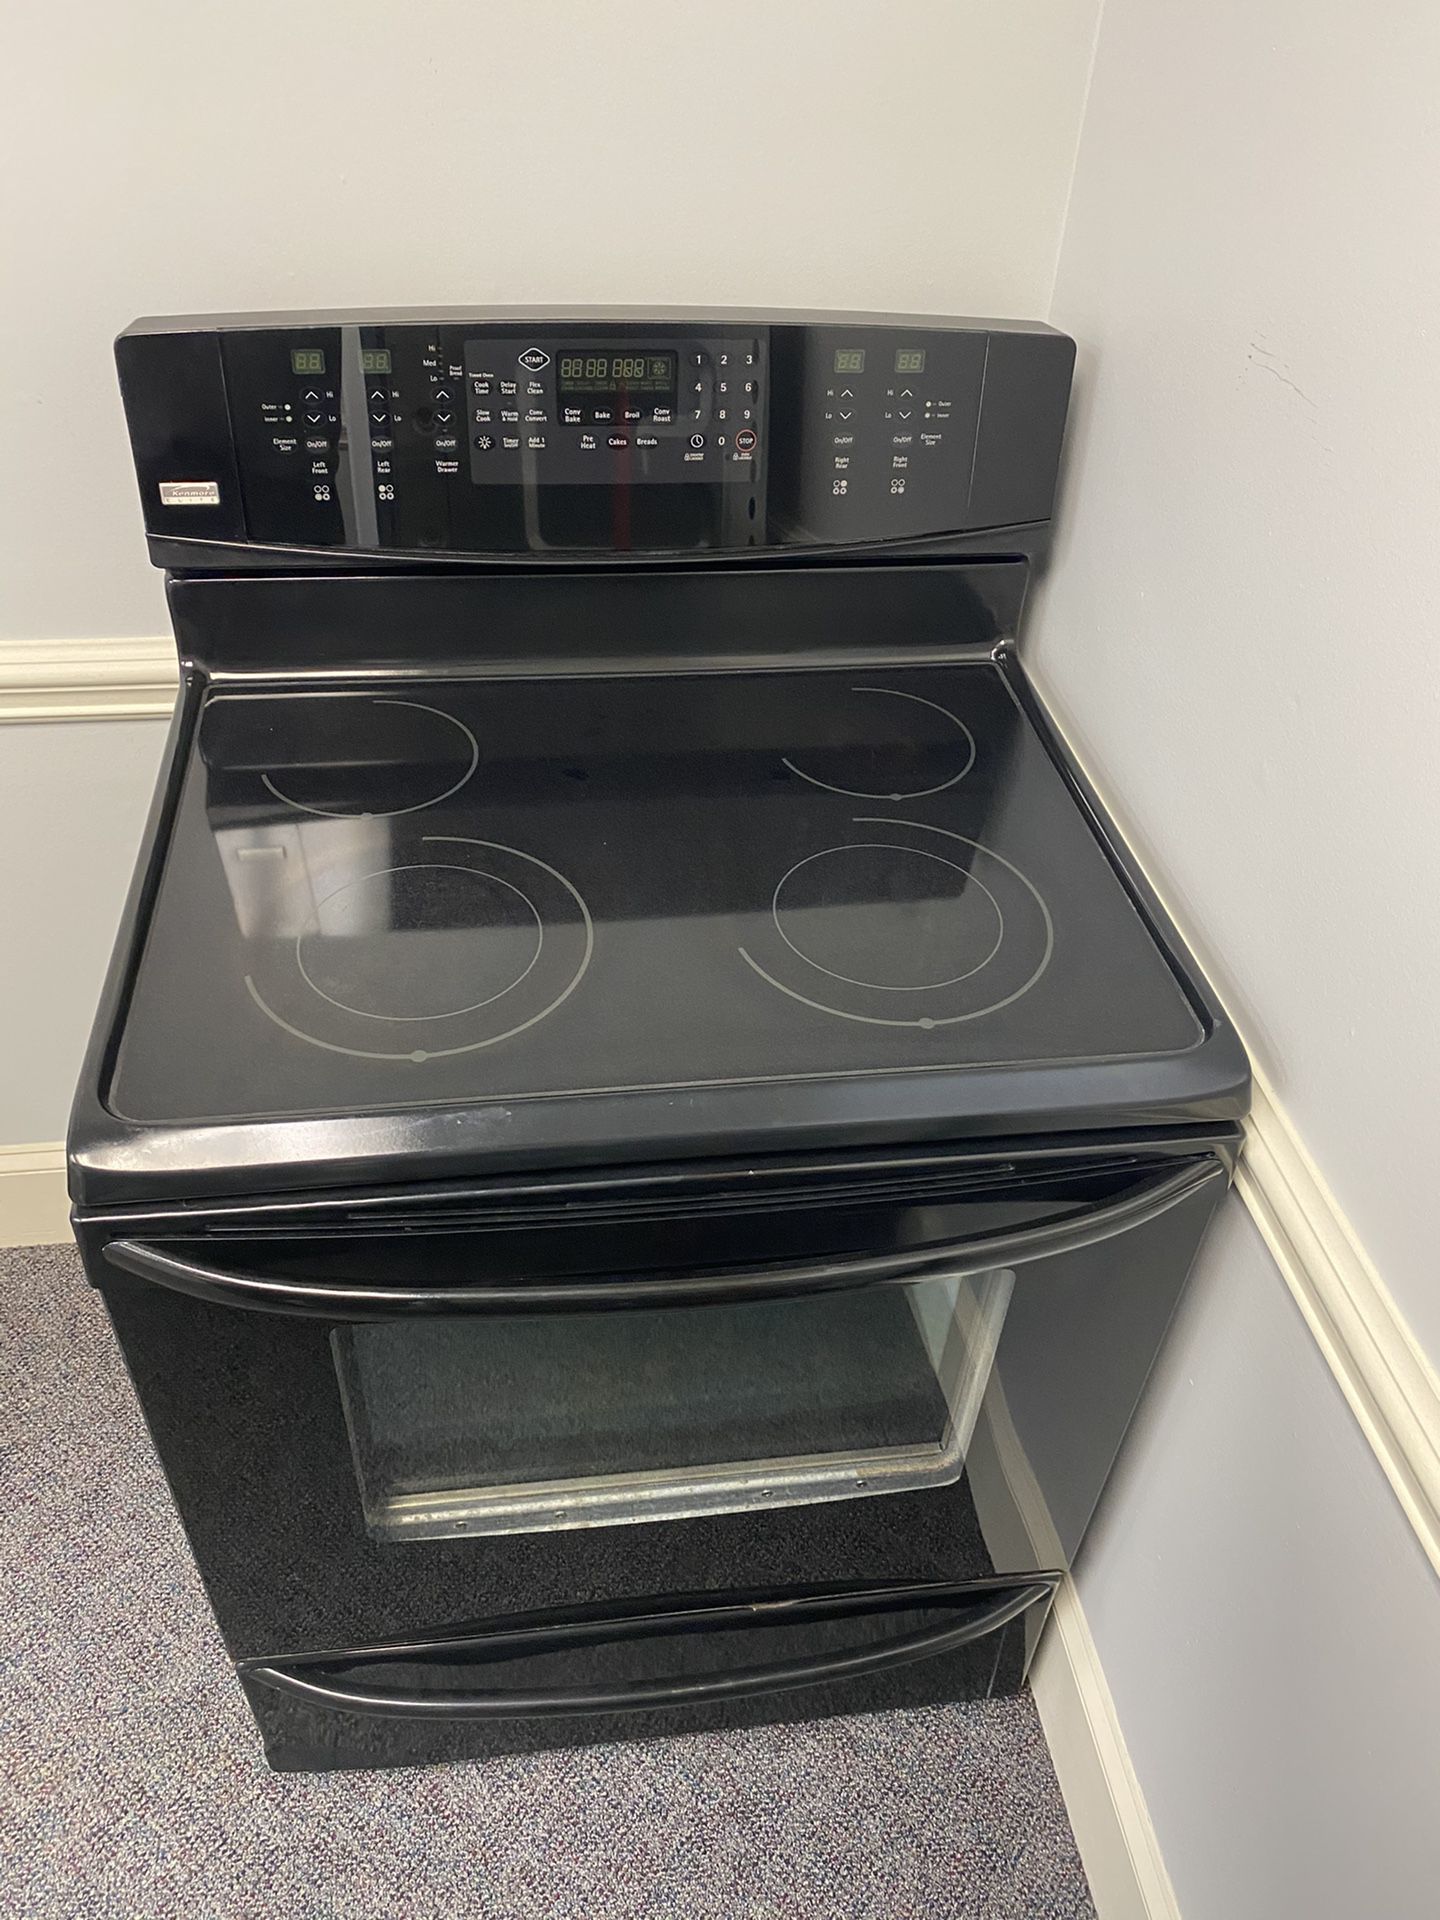 Kenmore elite glass top stove with convection oven and warmer draw